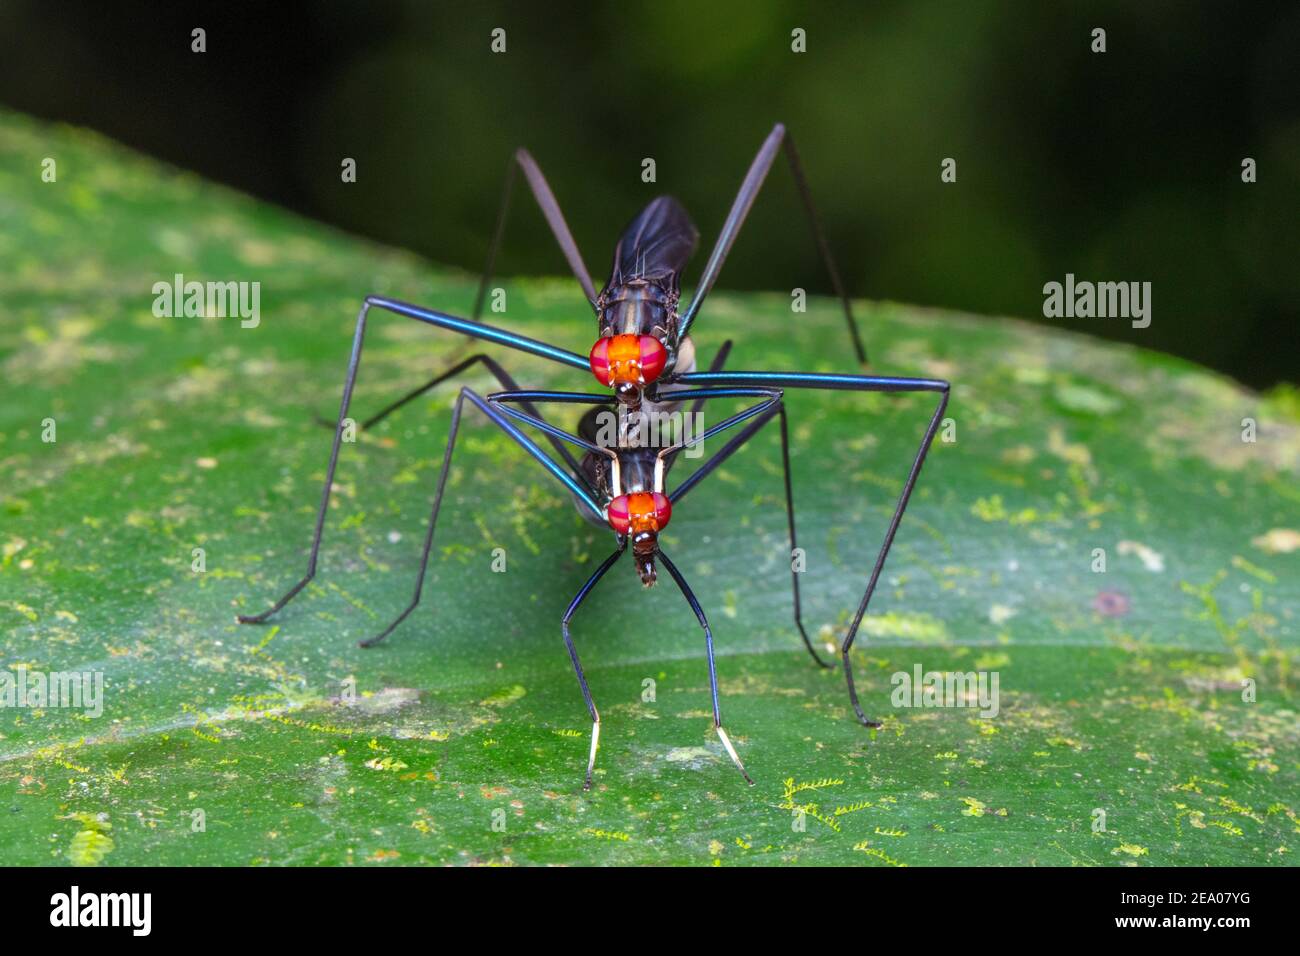 A pair of stilt flies, Micropezidae, mating on a leaf. Stock Photo